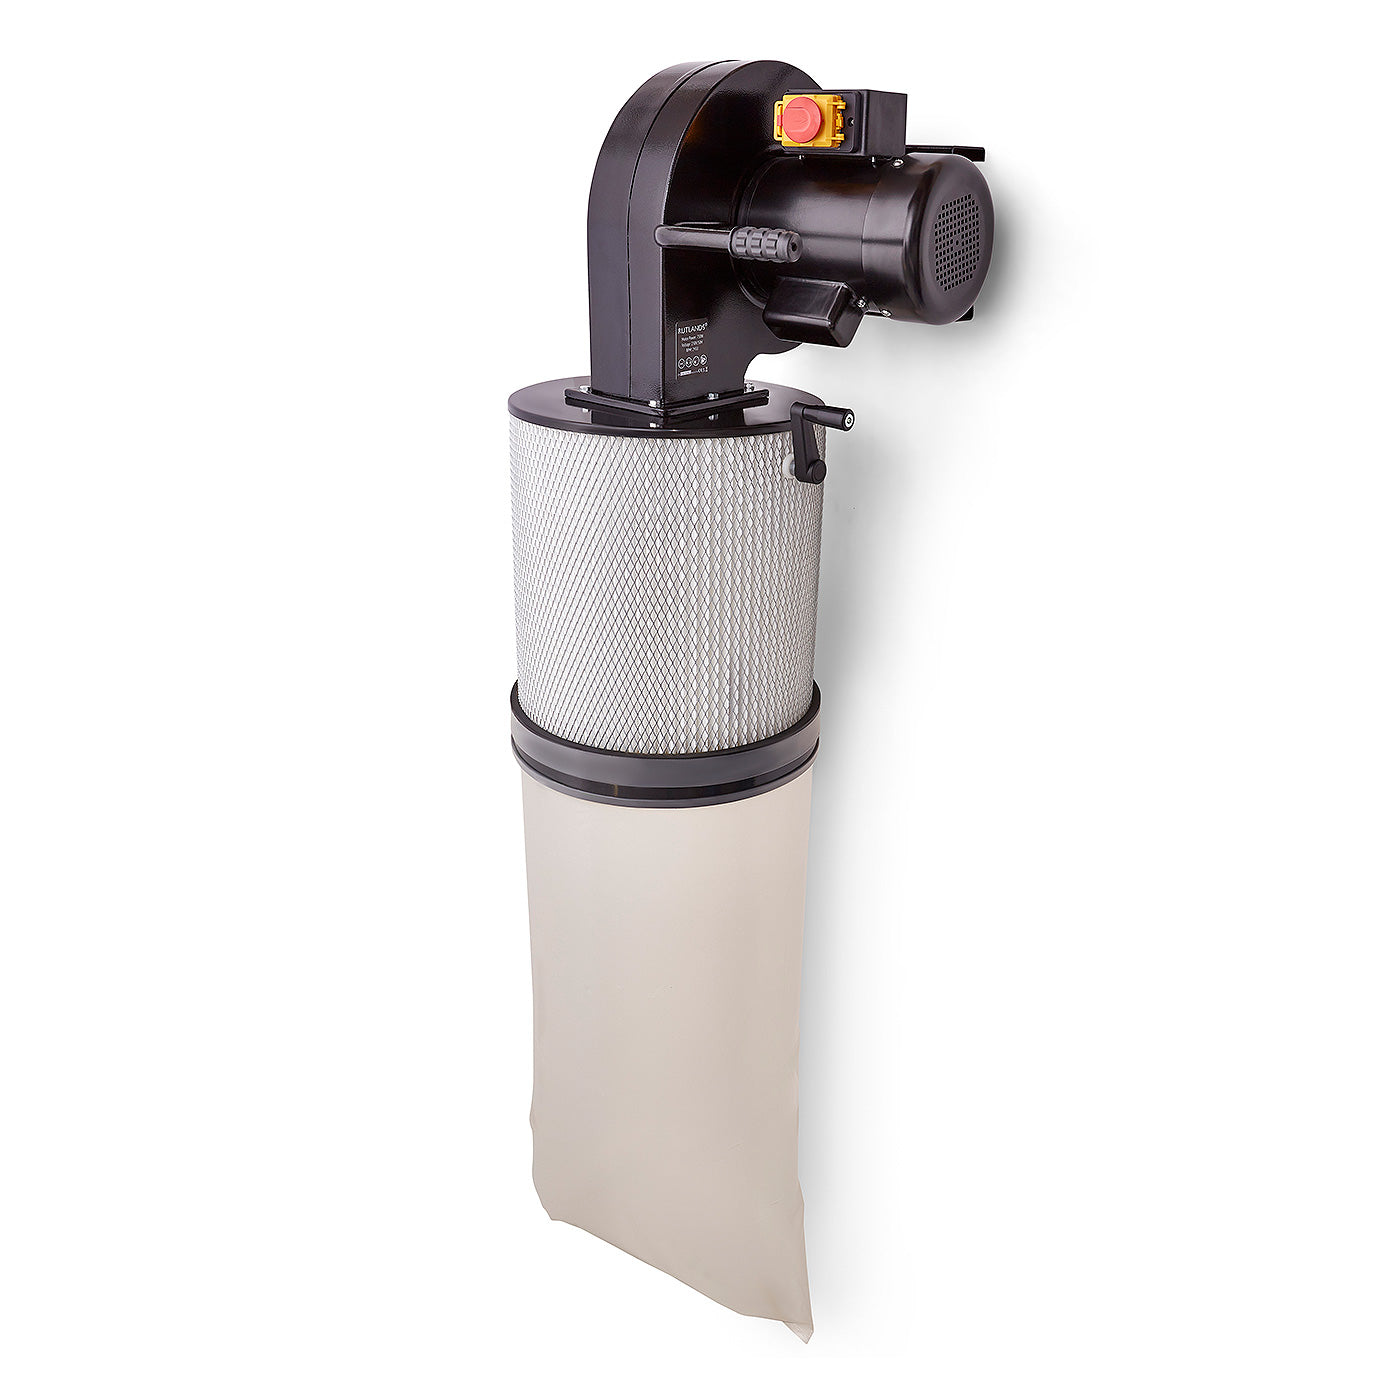 Wall-Mount Fine Filter Dust Collector